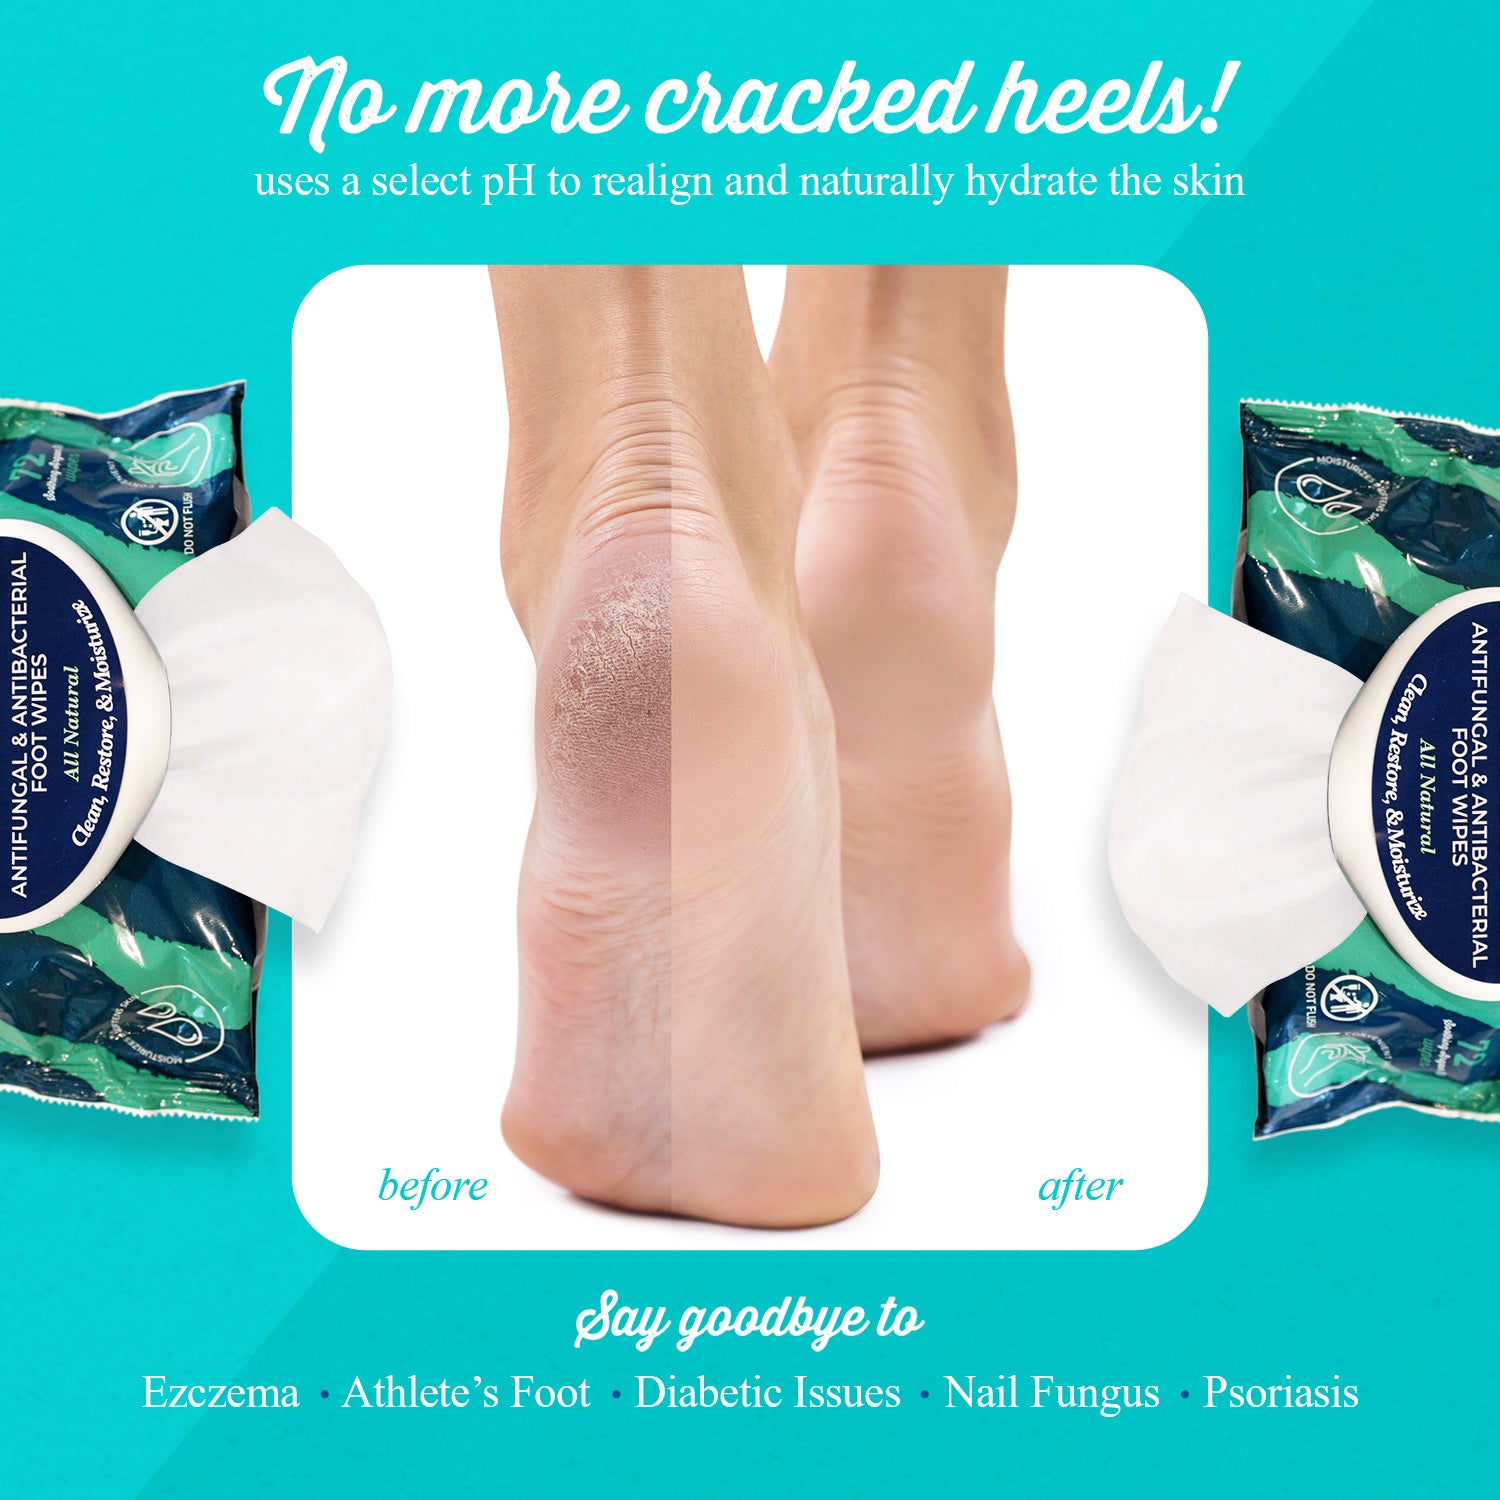 No more cracked heels! Our formula uses a select pH to realign and naturally hydrate the skin. See results after first use! Say goodbye to eczema. althlete's foot, diabetic issues, nail fungus and psoriasis.